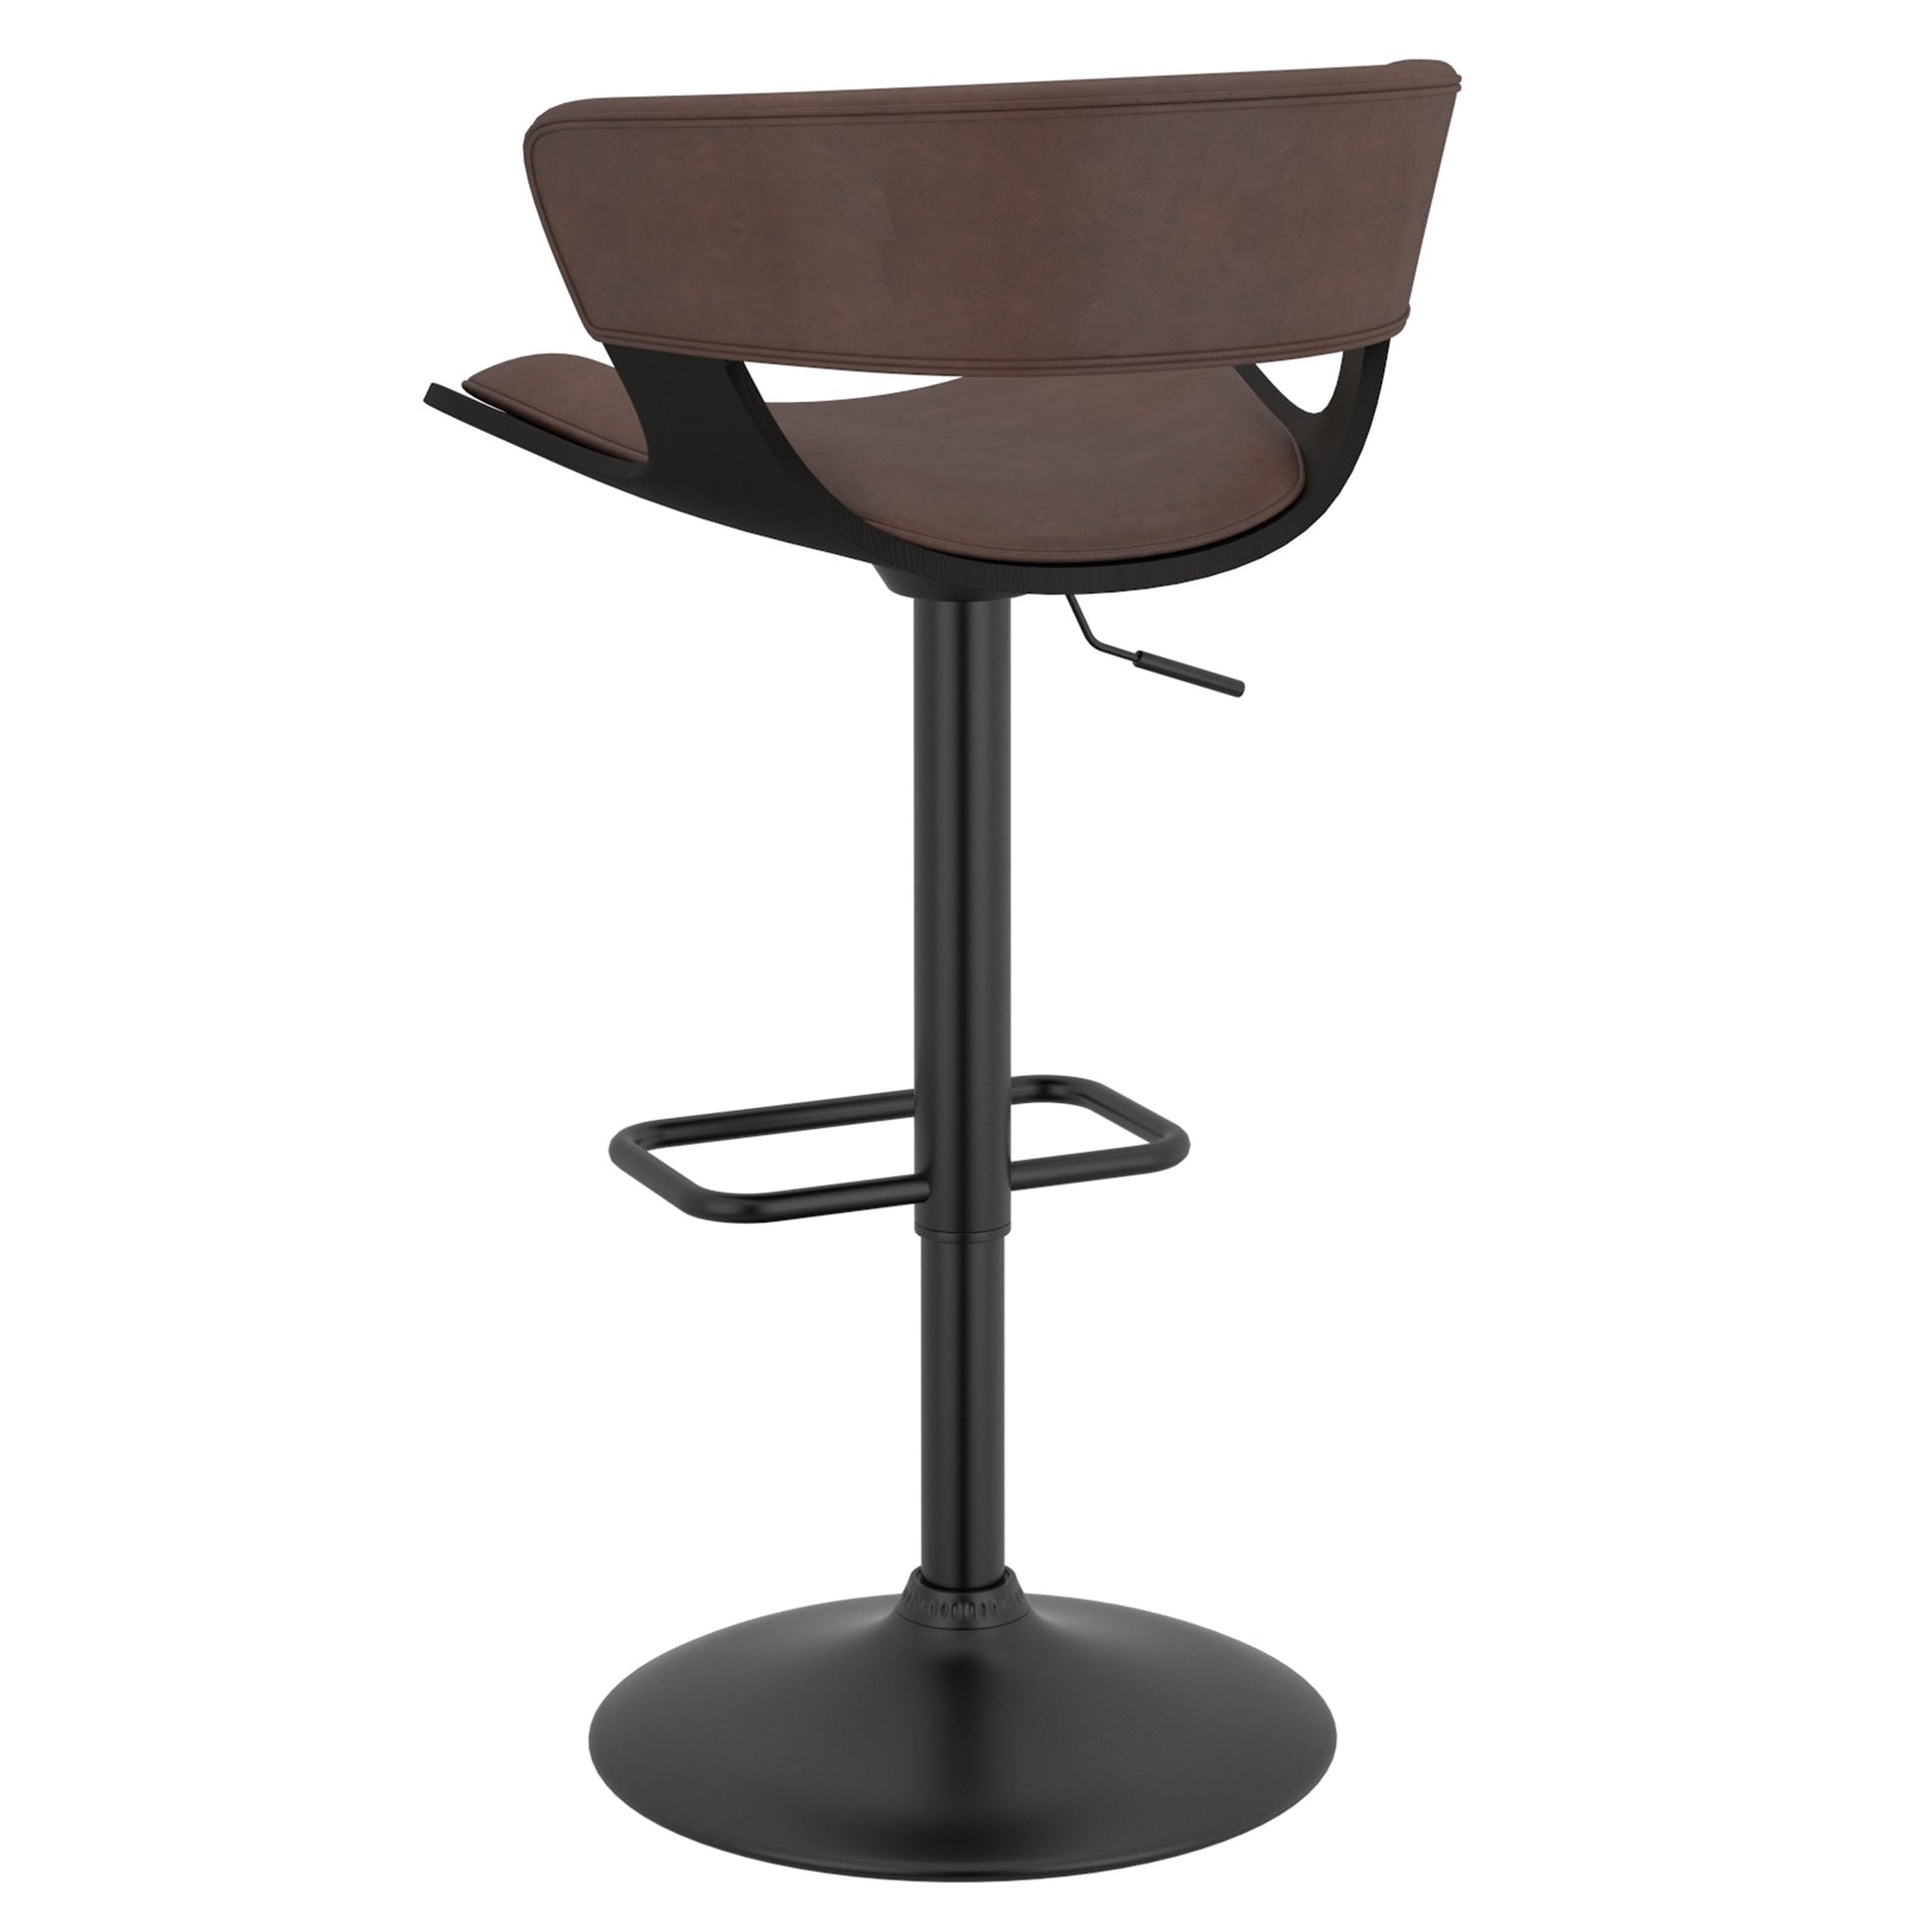 Height Adjustable Bar Stools | Set of 2 | Rover Brown - Your Bar Stools Canada